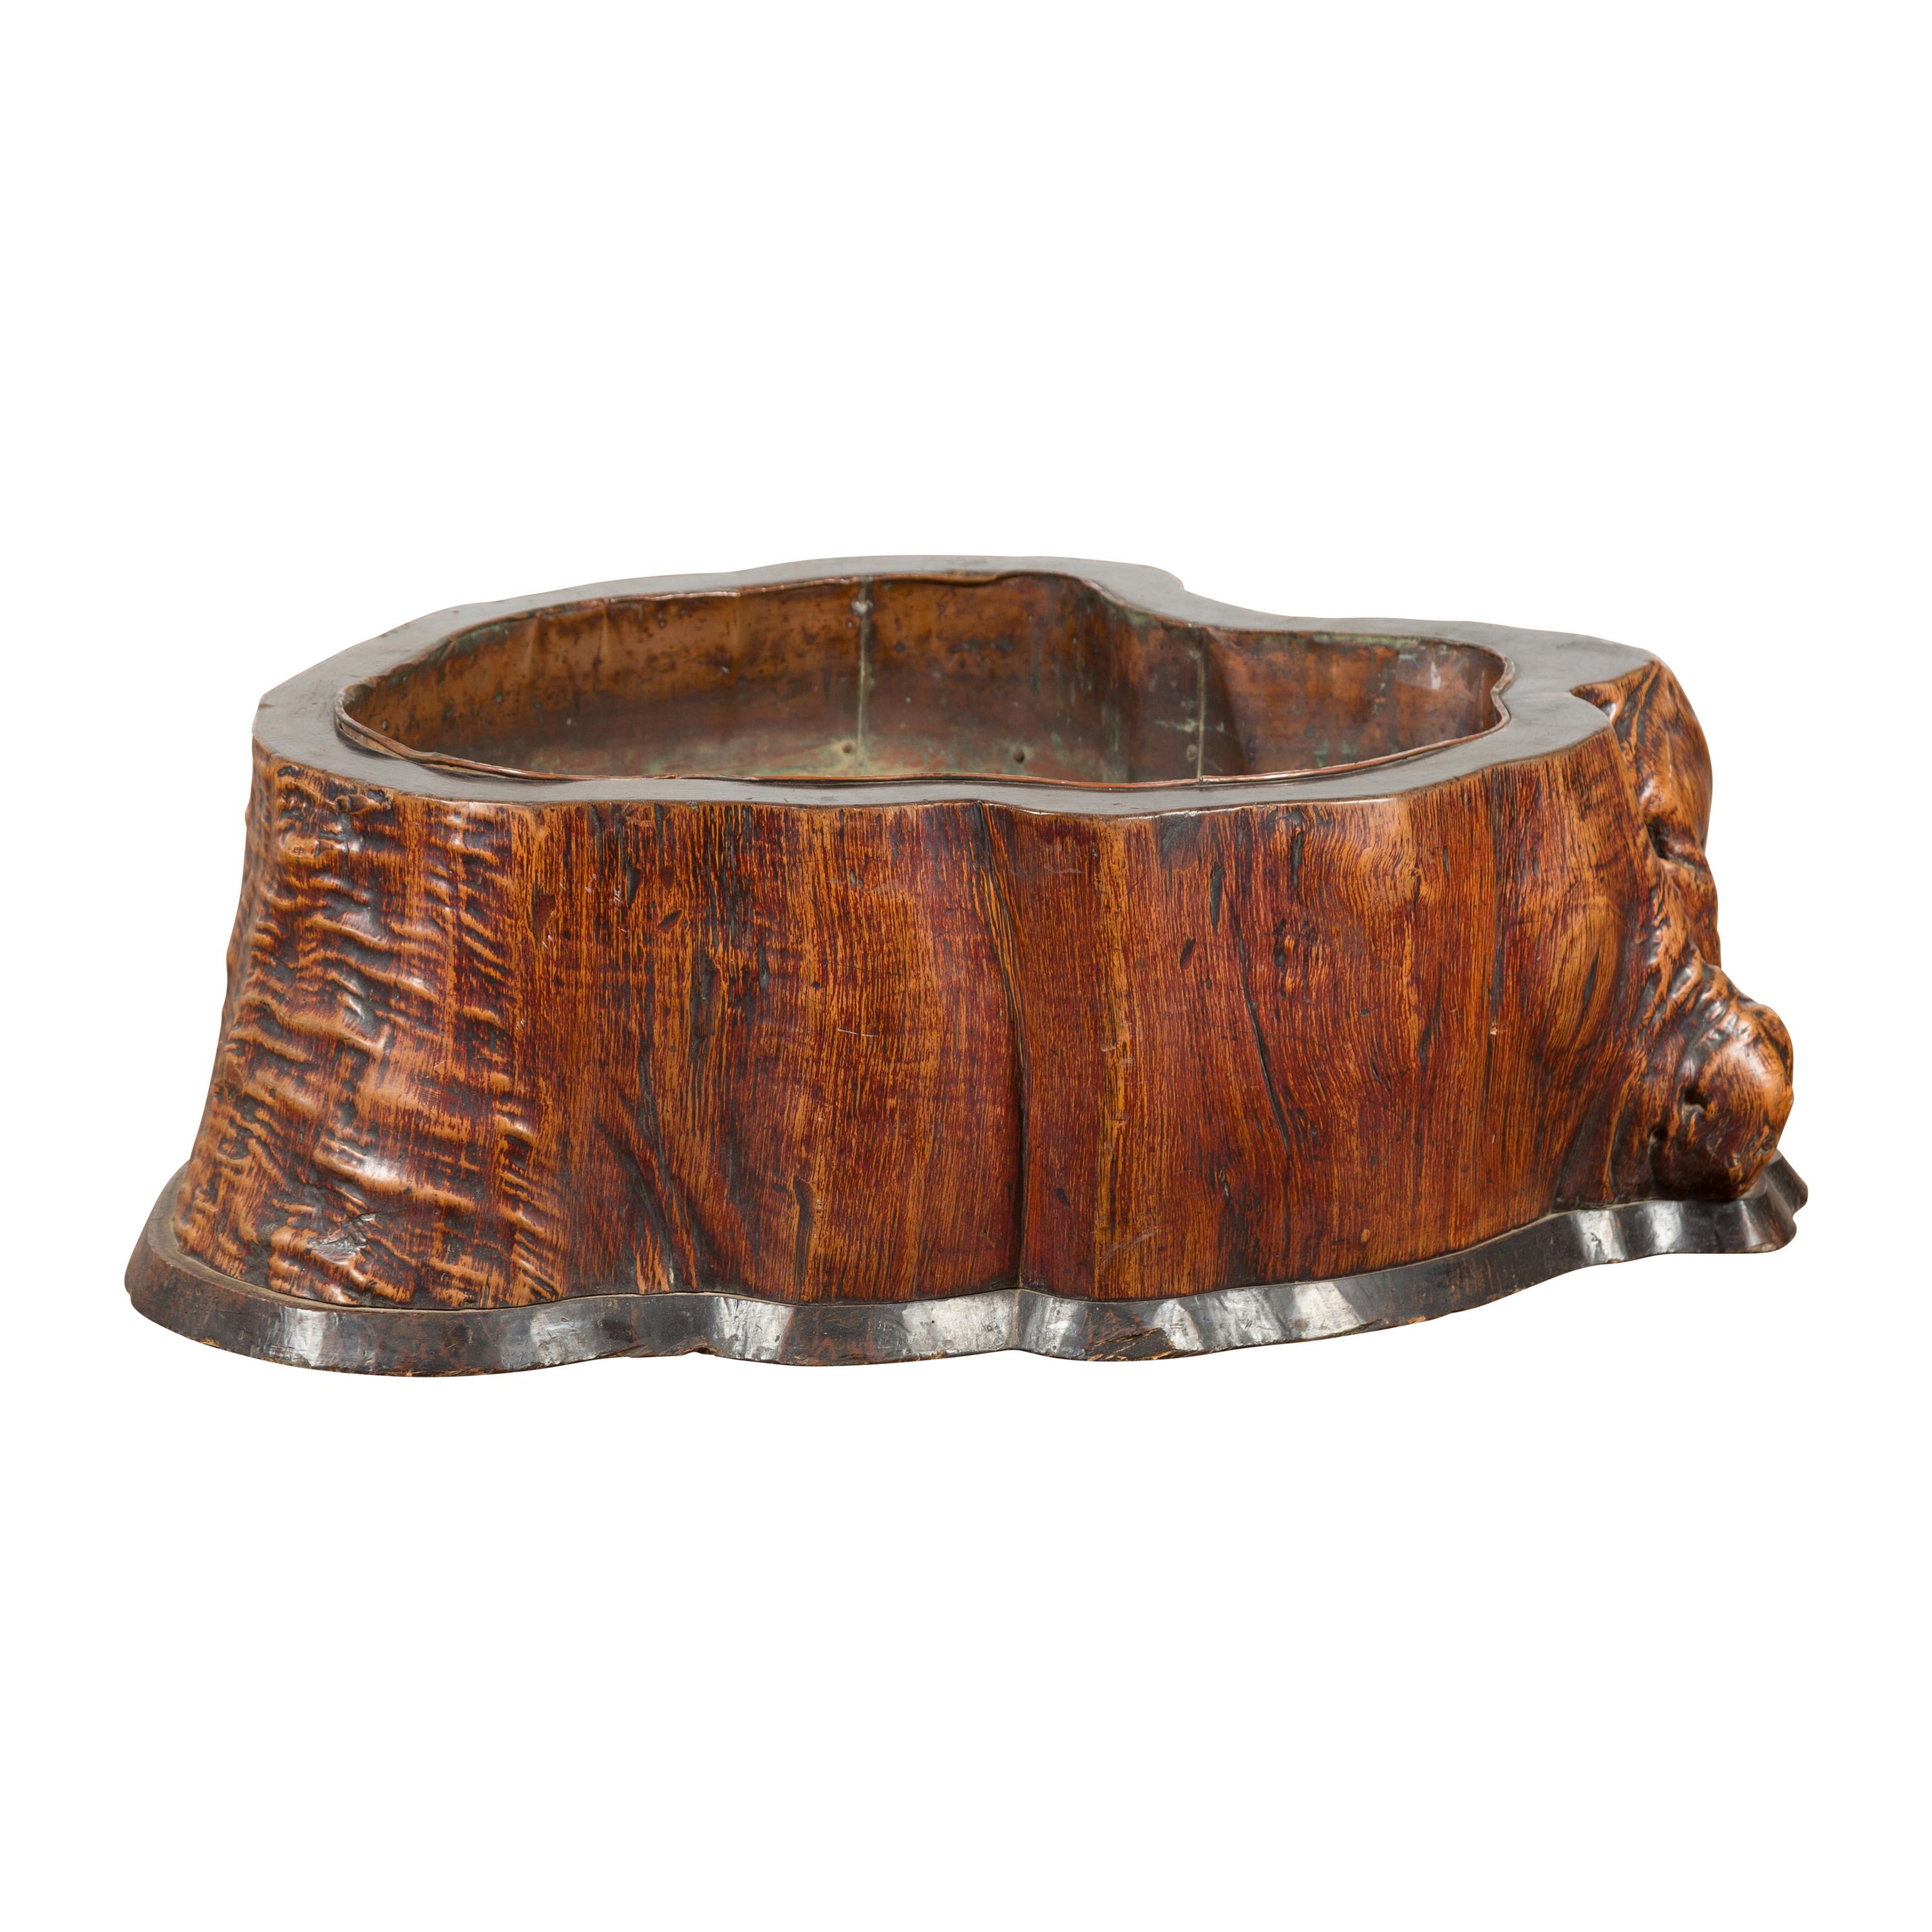 Japanese Meiji Period 19th Century Tree Trunk Hibachi with Copper Lining